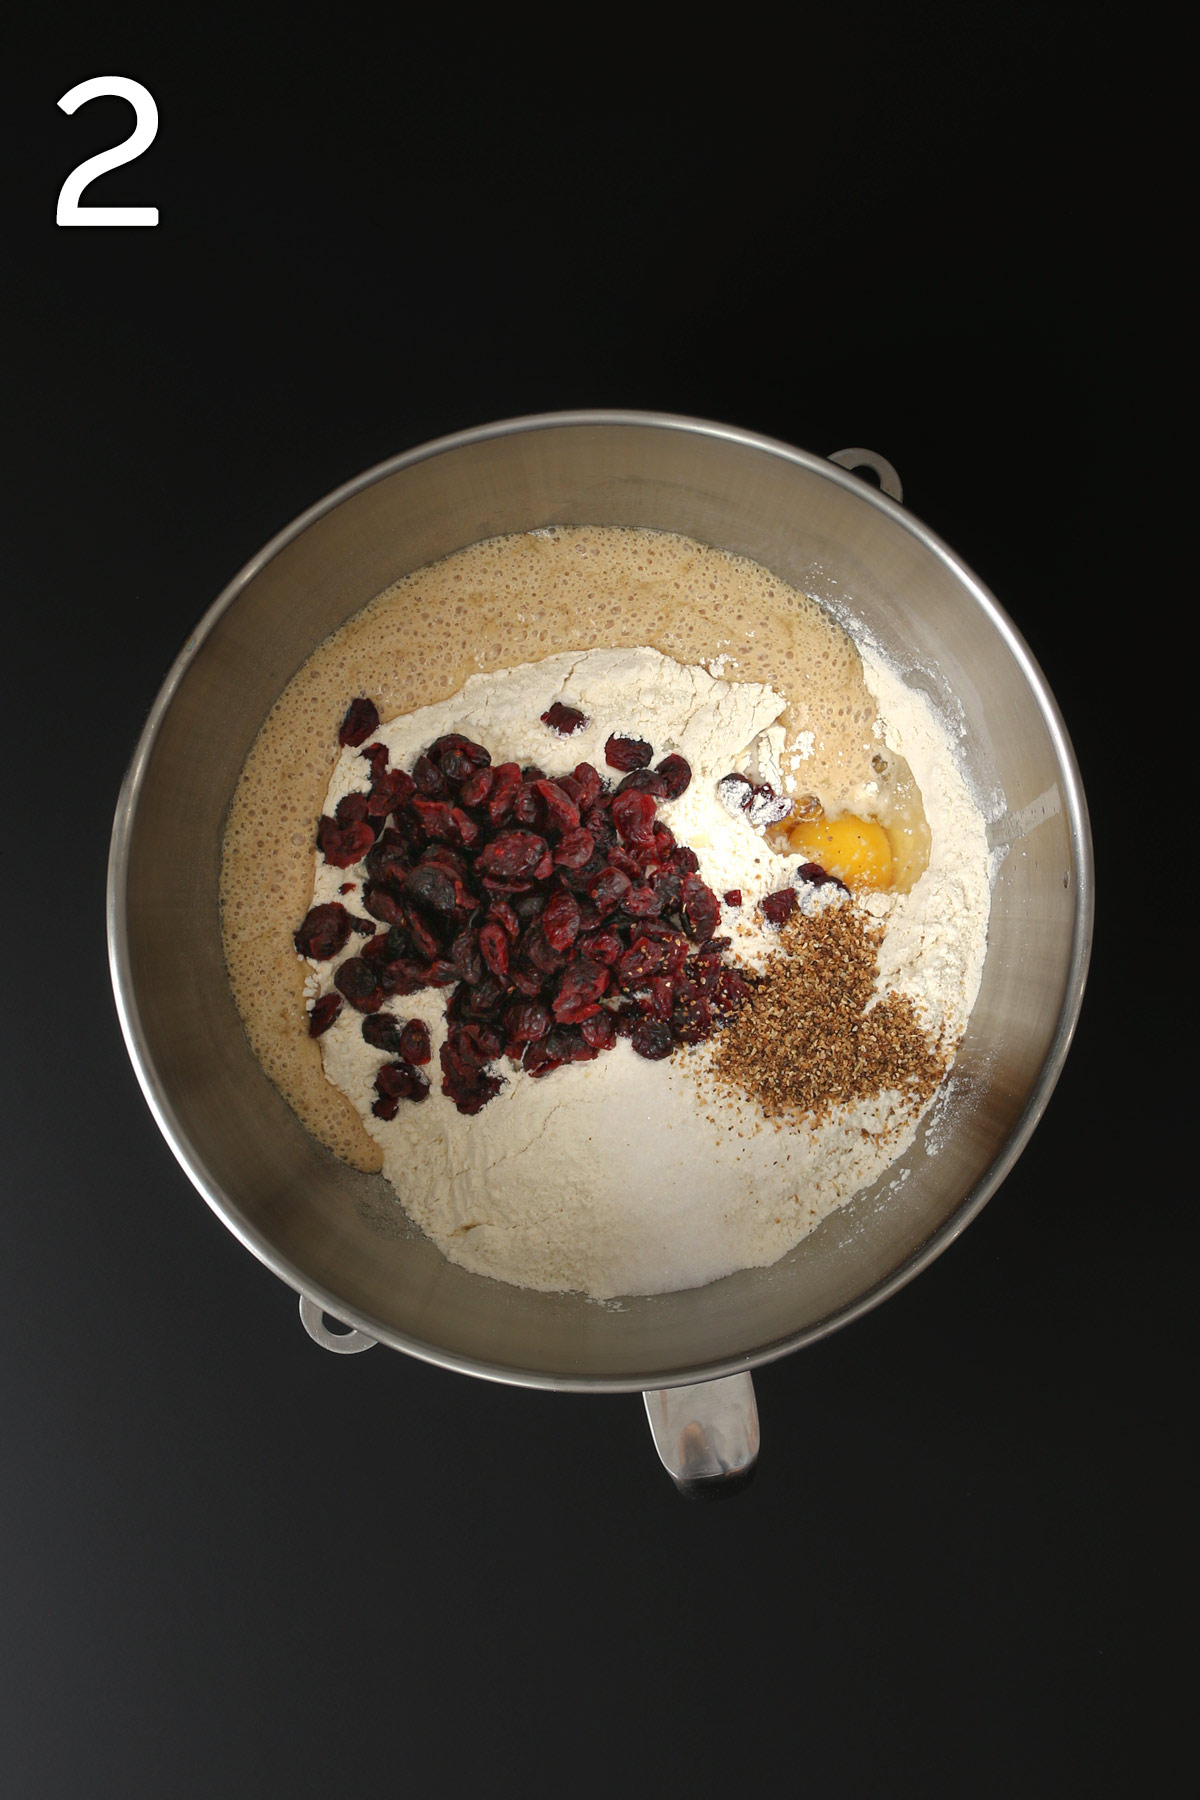 additional ingredients added to the yeast mixture in the mixer bowl.